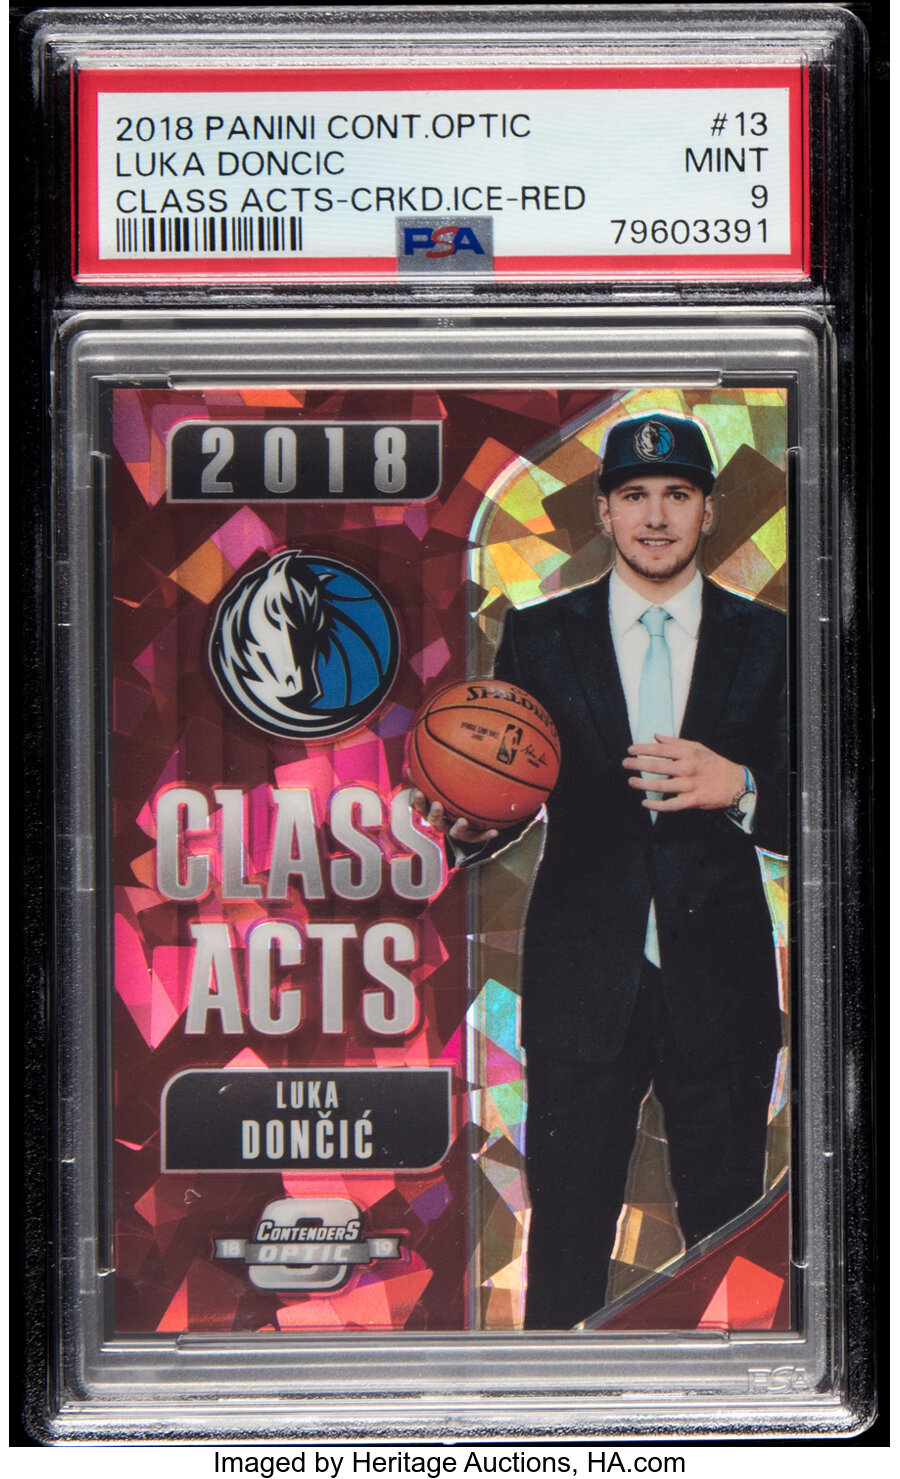 2018 Panini Contenders Optic Luka Doncic (Class Acts - Cracked Ice Red) #13 PSA Mint 9